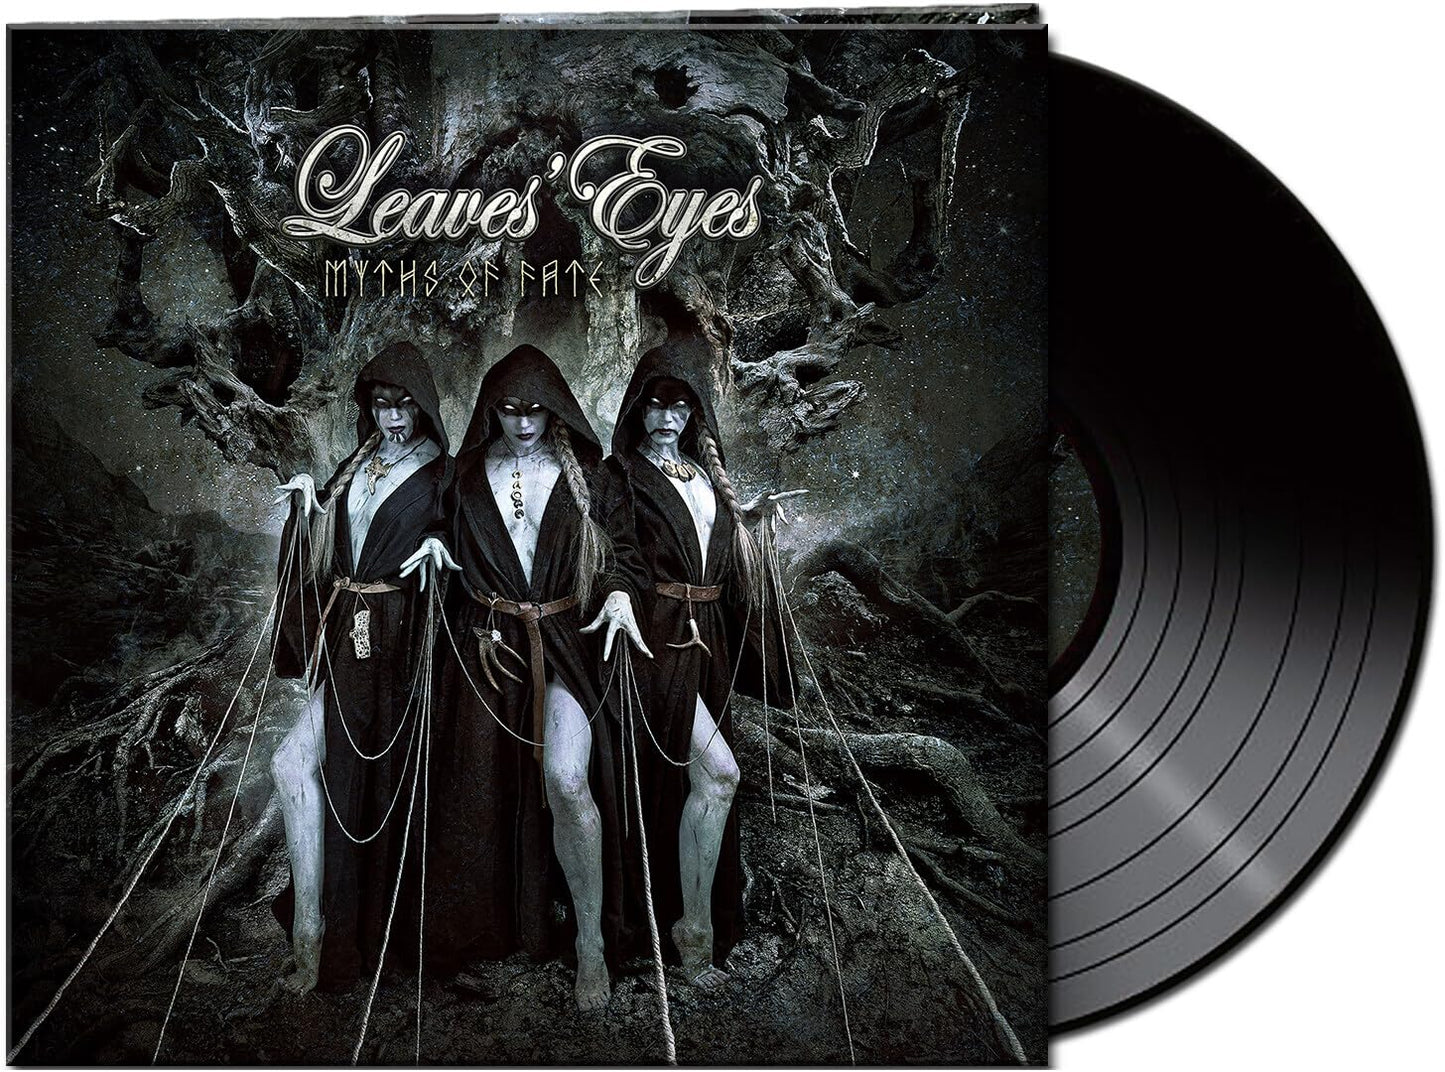 Leaves' Eyes - Myths Of Fate Limited Edition Black Vinyl LP